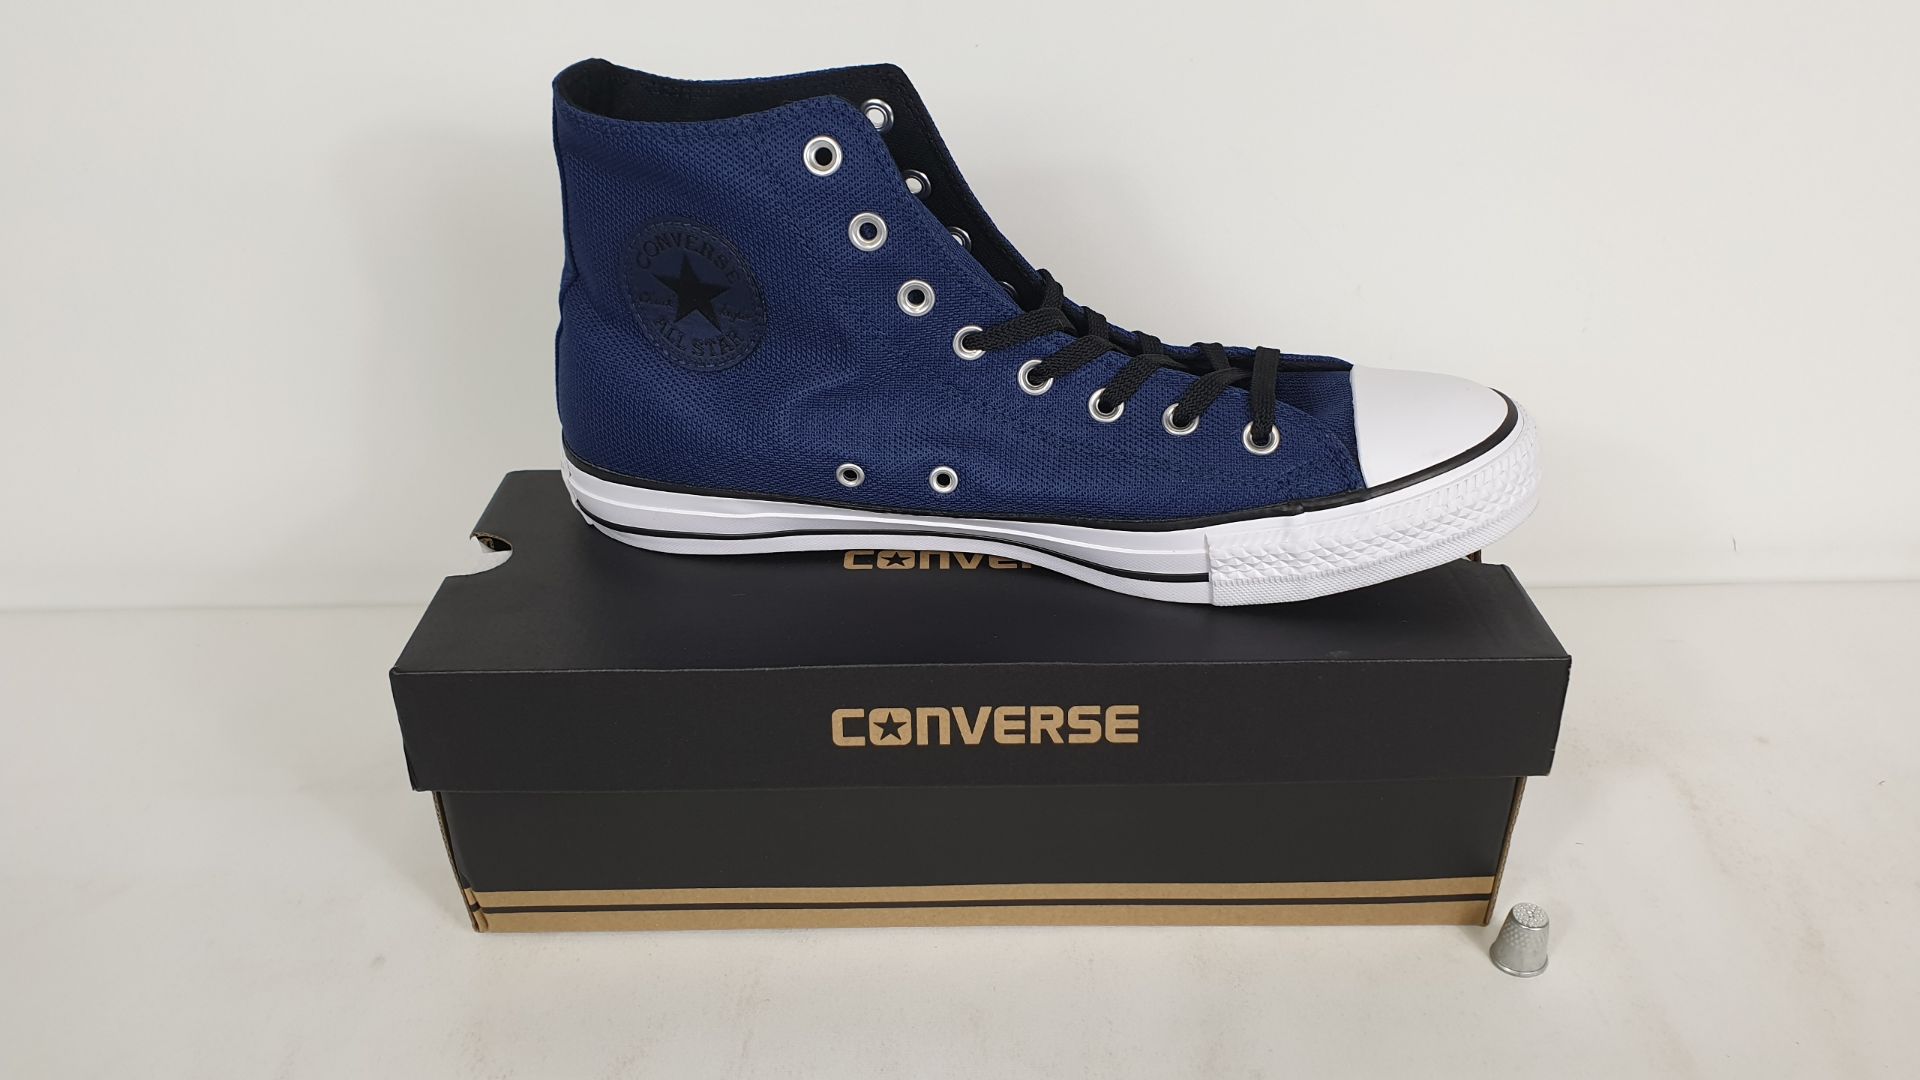 6 X PAIRS OF CONVERSE TRAINERS CTAS HI MIDNIGHT NAVY / BLACK AND WHITE SIZE 10 - BRAND NEW AND